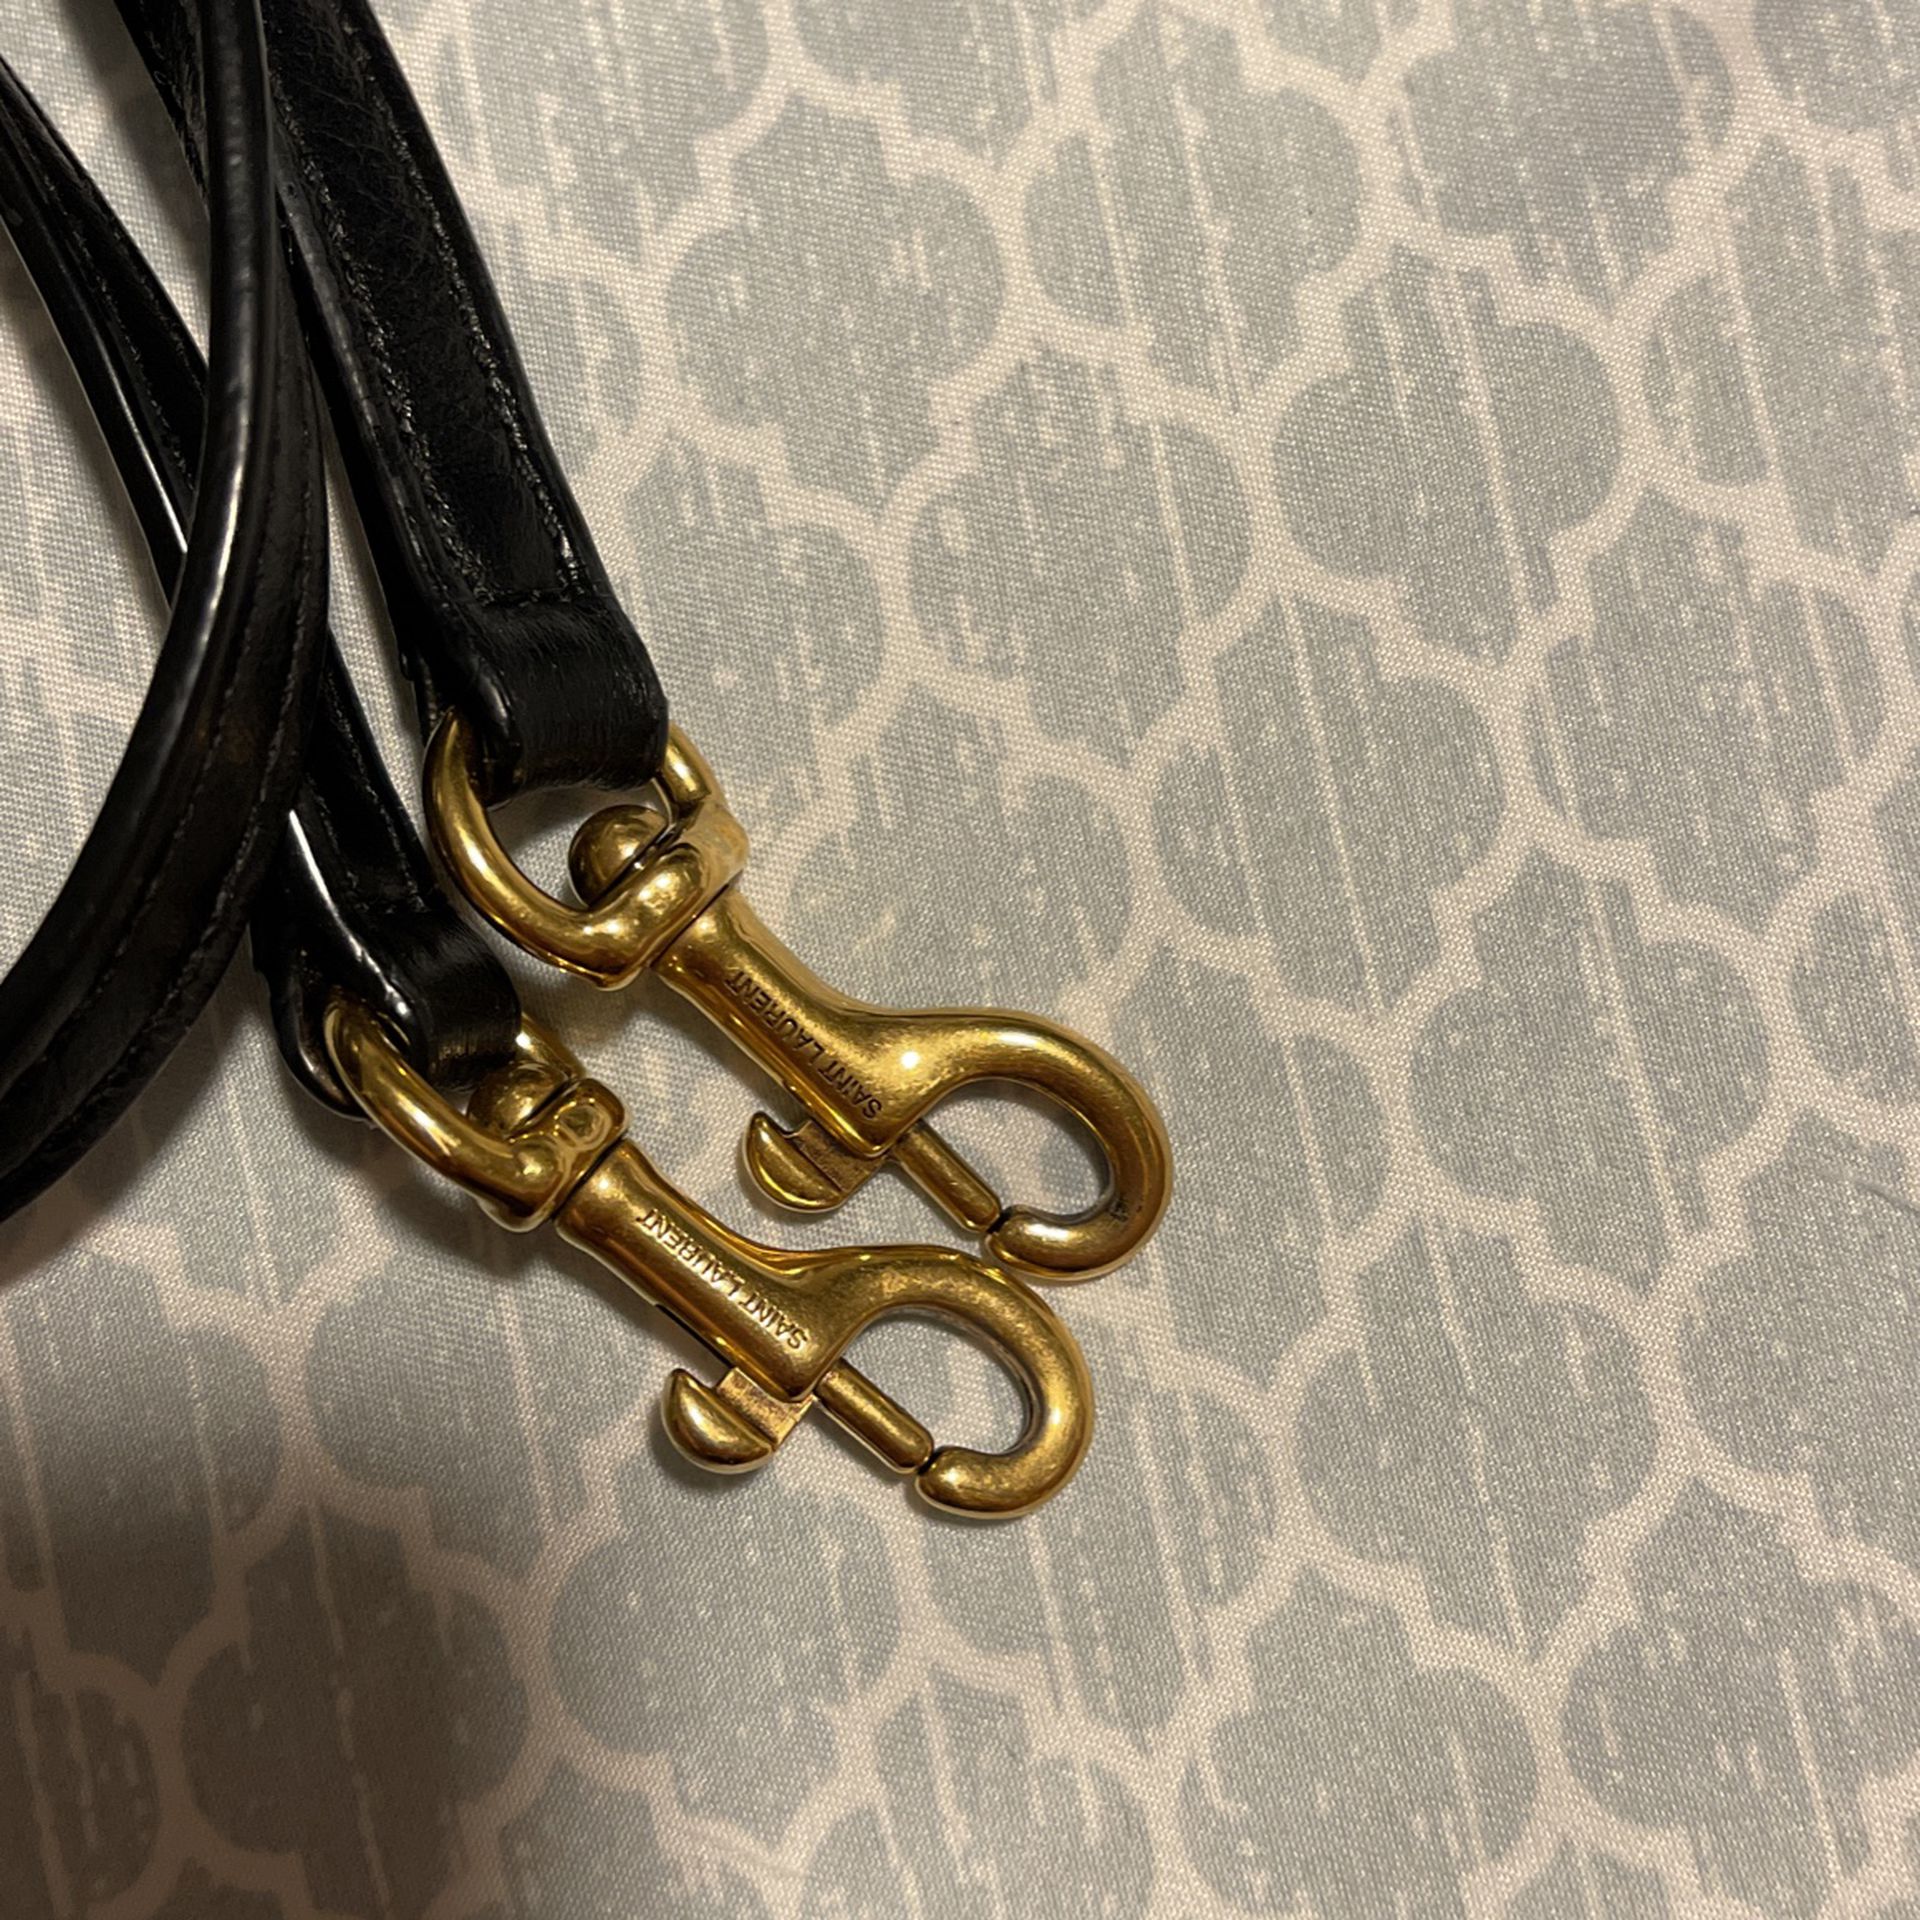 Authentic YSL Phone holder Bag for Sale in Anaheim, CA - OfferUp